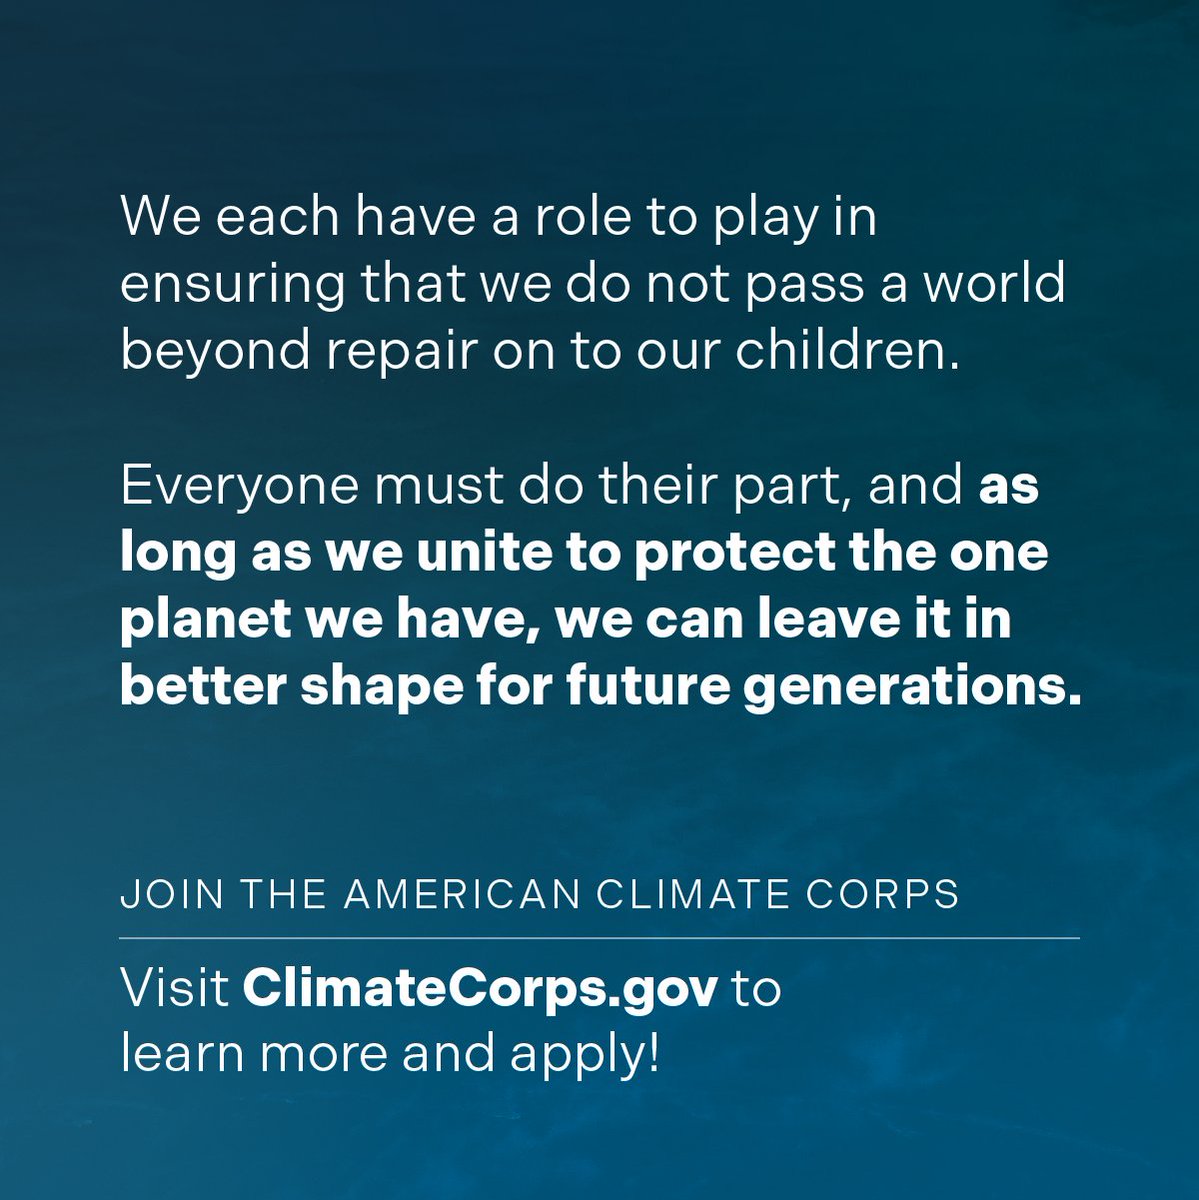 States across the country are launching their own programs for folks who are passionate about leaving the planet better than they found it. If that sounds like you or someone you know, check out ClimateCorps.gov to learn more and apply.